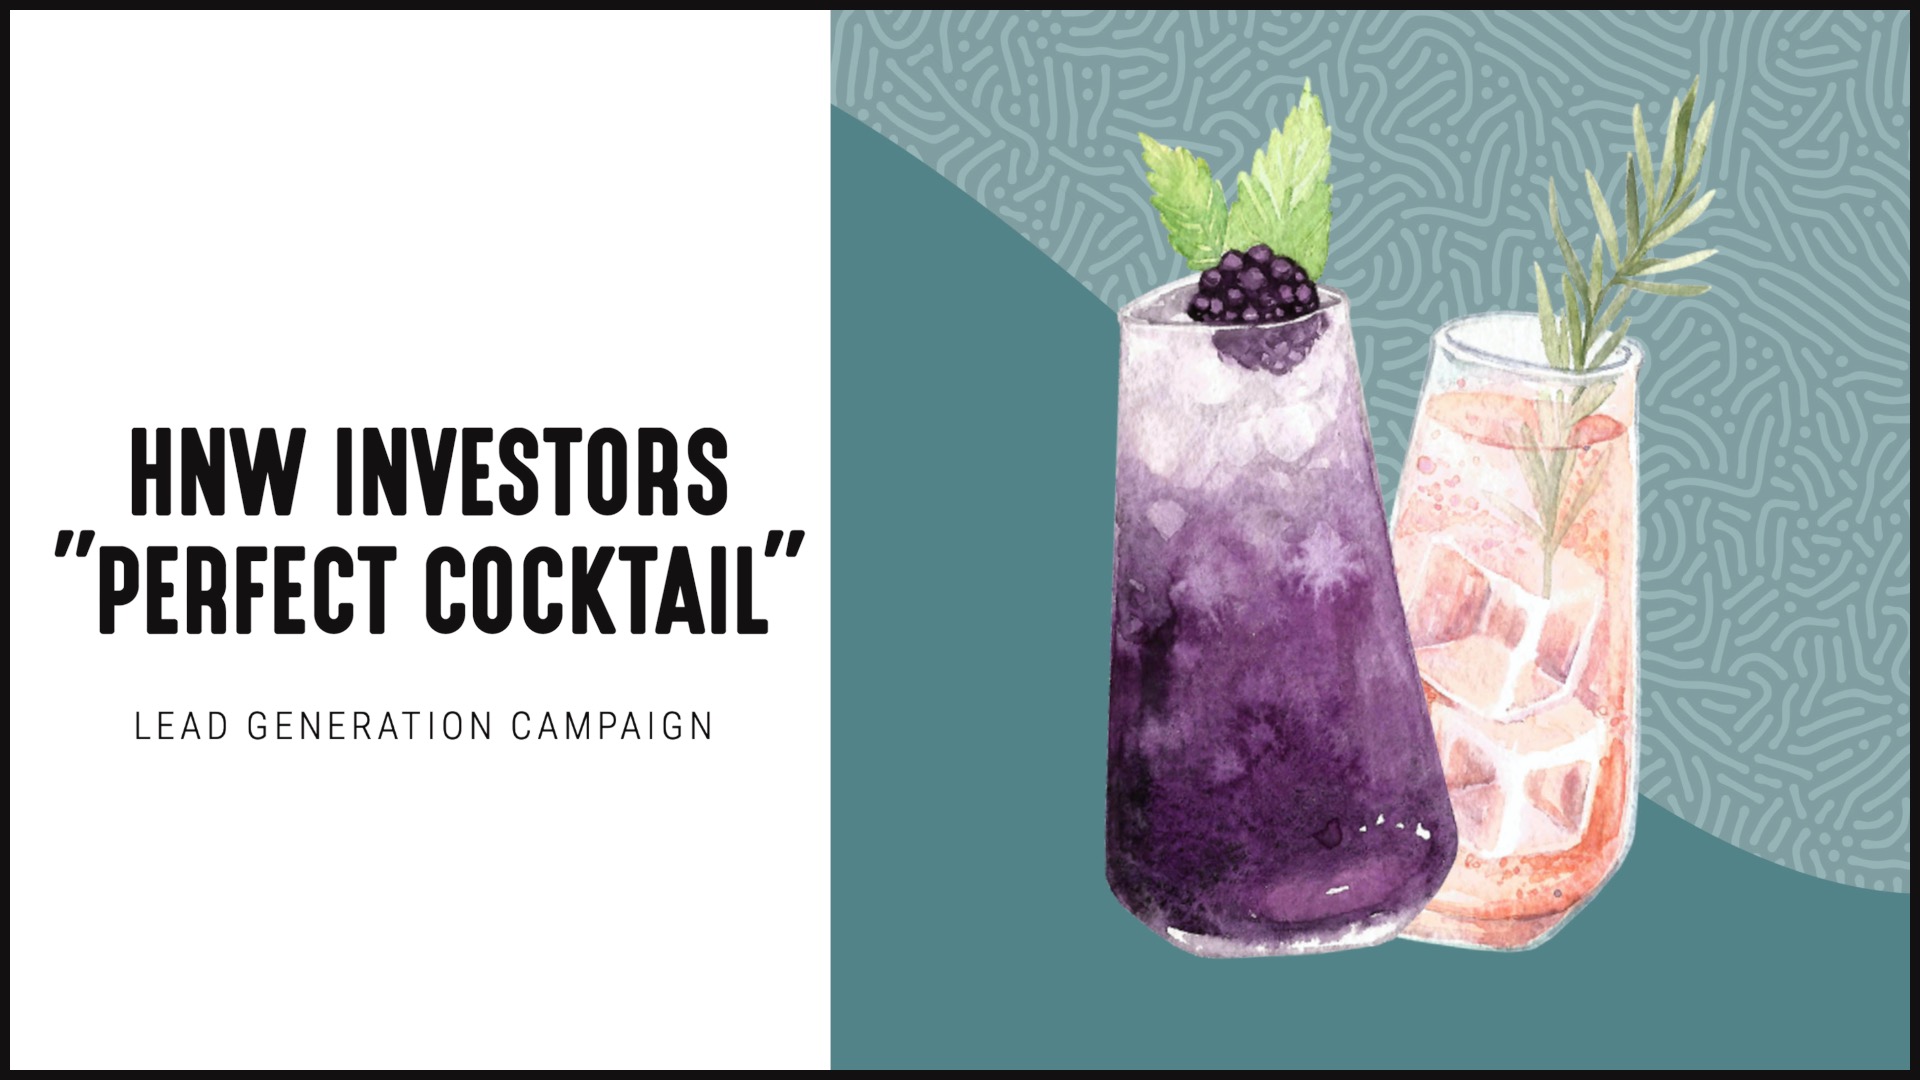 [NEW] Lead Gen Campaign | HNW Investors “Perfect Cocktail”